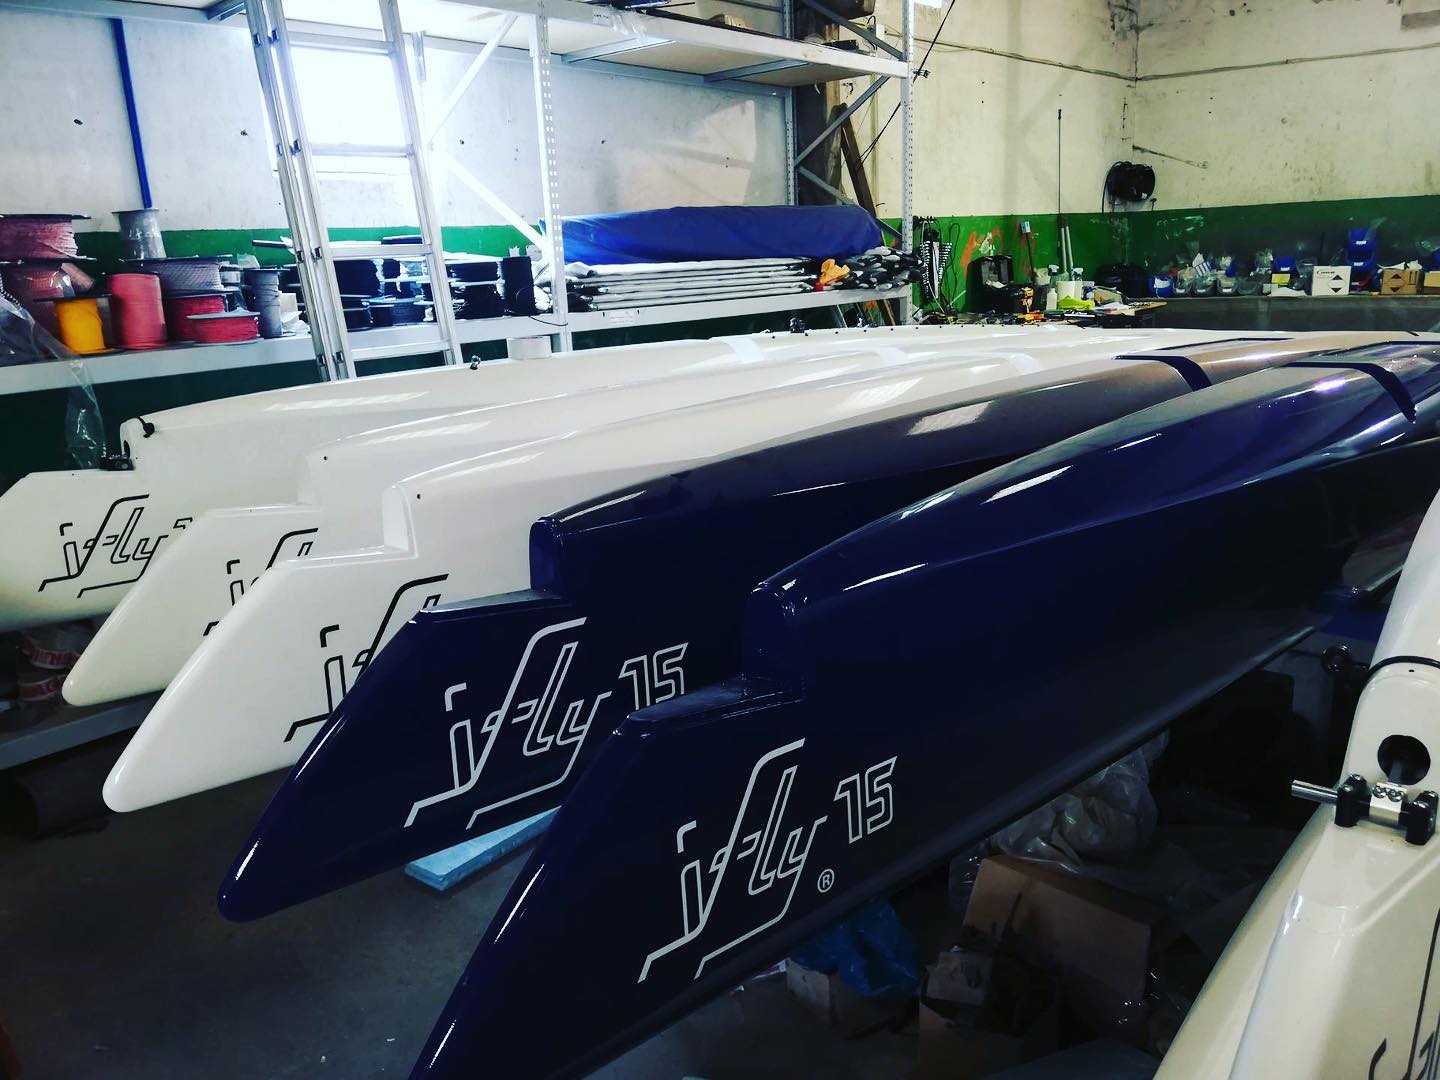 next five iFLYs going to Germany. New individual color in front 

#iFLYpower #SaveTheSummer #SoundOfSpeed #loyaltothefoil #foiler #sail #sailboats #sailingboat #sailingphotography #sailingworld #iFLY #FormulaFoil #FoilingCatamaran #Catamaran #iFLY15 #Katamaran #FlySafe #ActiveFoilControl #Foil #Hydrofoil #foilinggeneration #lifestyle #sailing #foiling #flying #sailFriends #loyaltothefoil #codeF #sailboats #sailingboat #TheNewFoilingGeneration